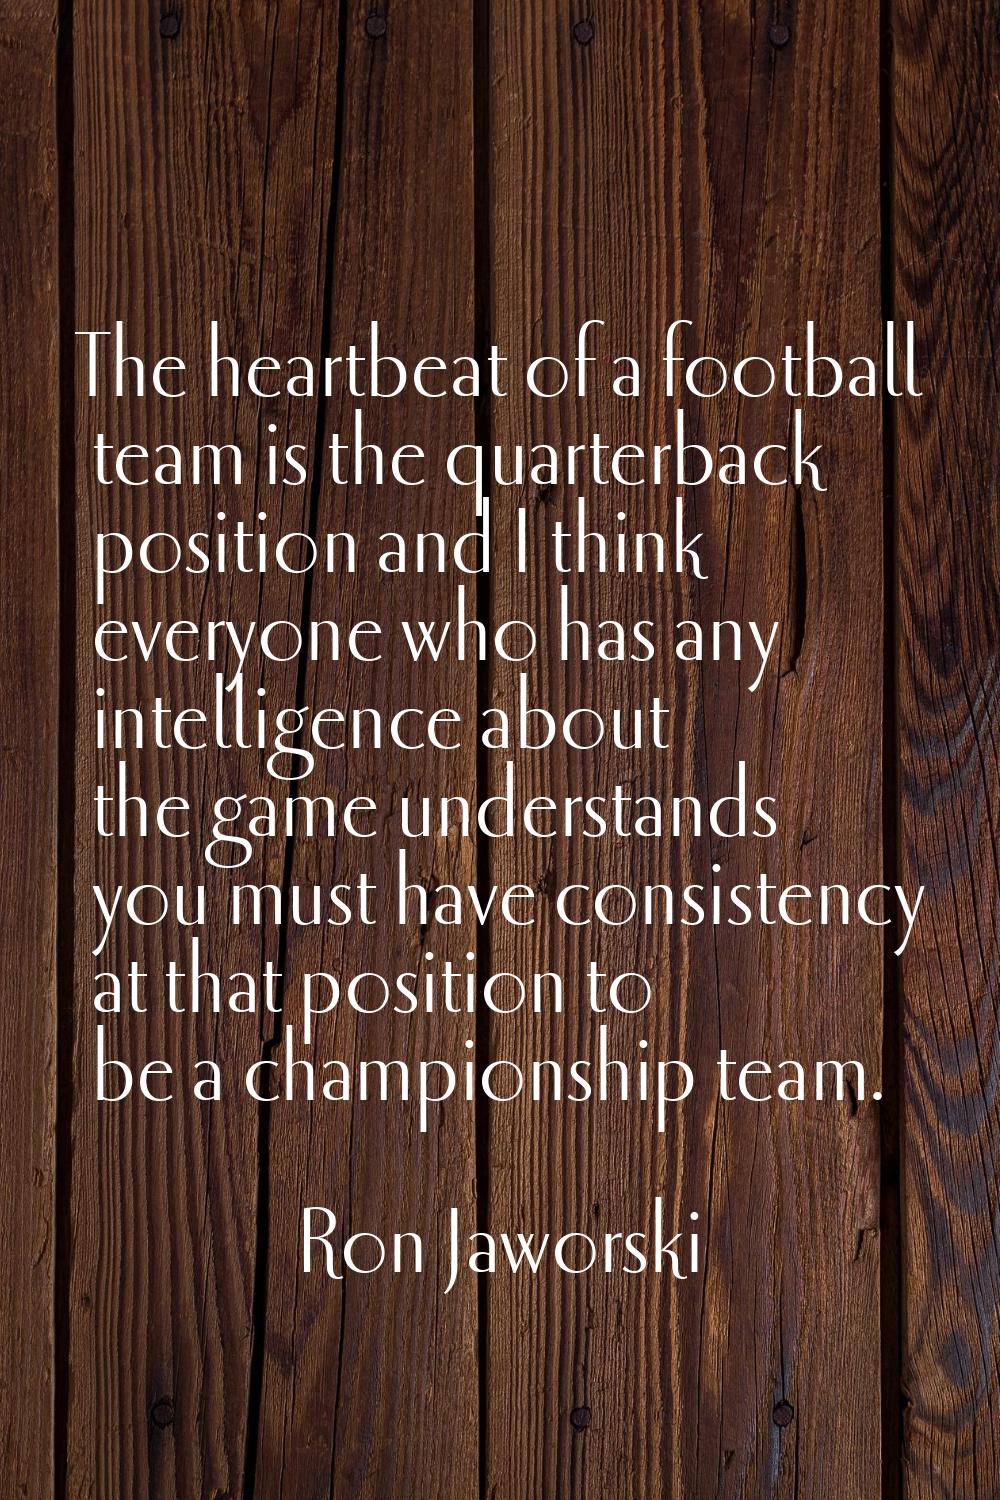 The heartbeat of a football team is the quarterback position and I think everyone who has any intel